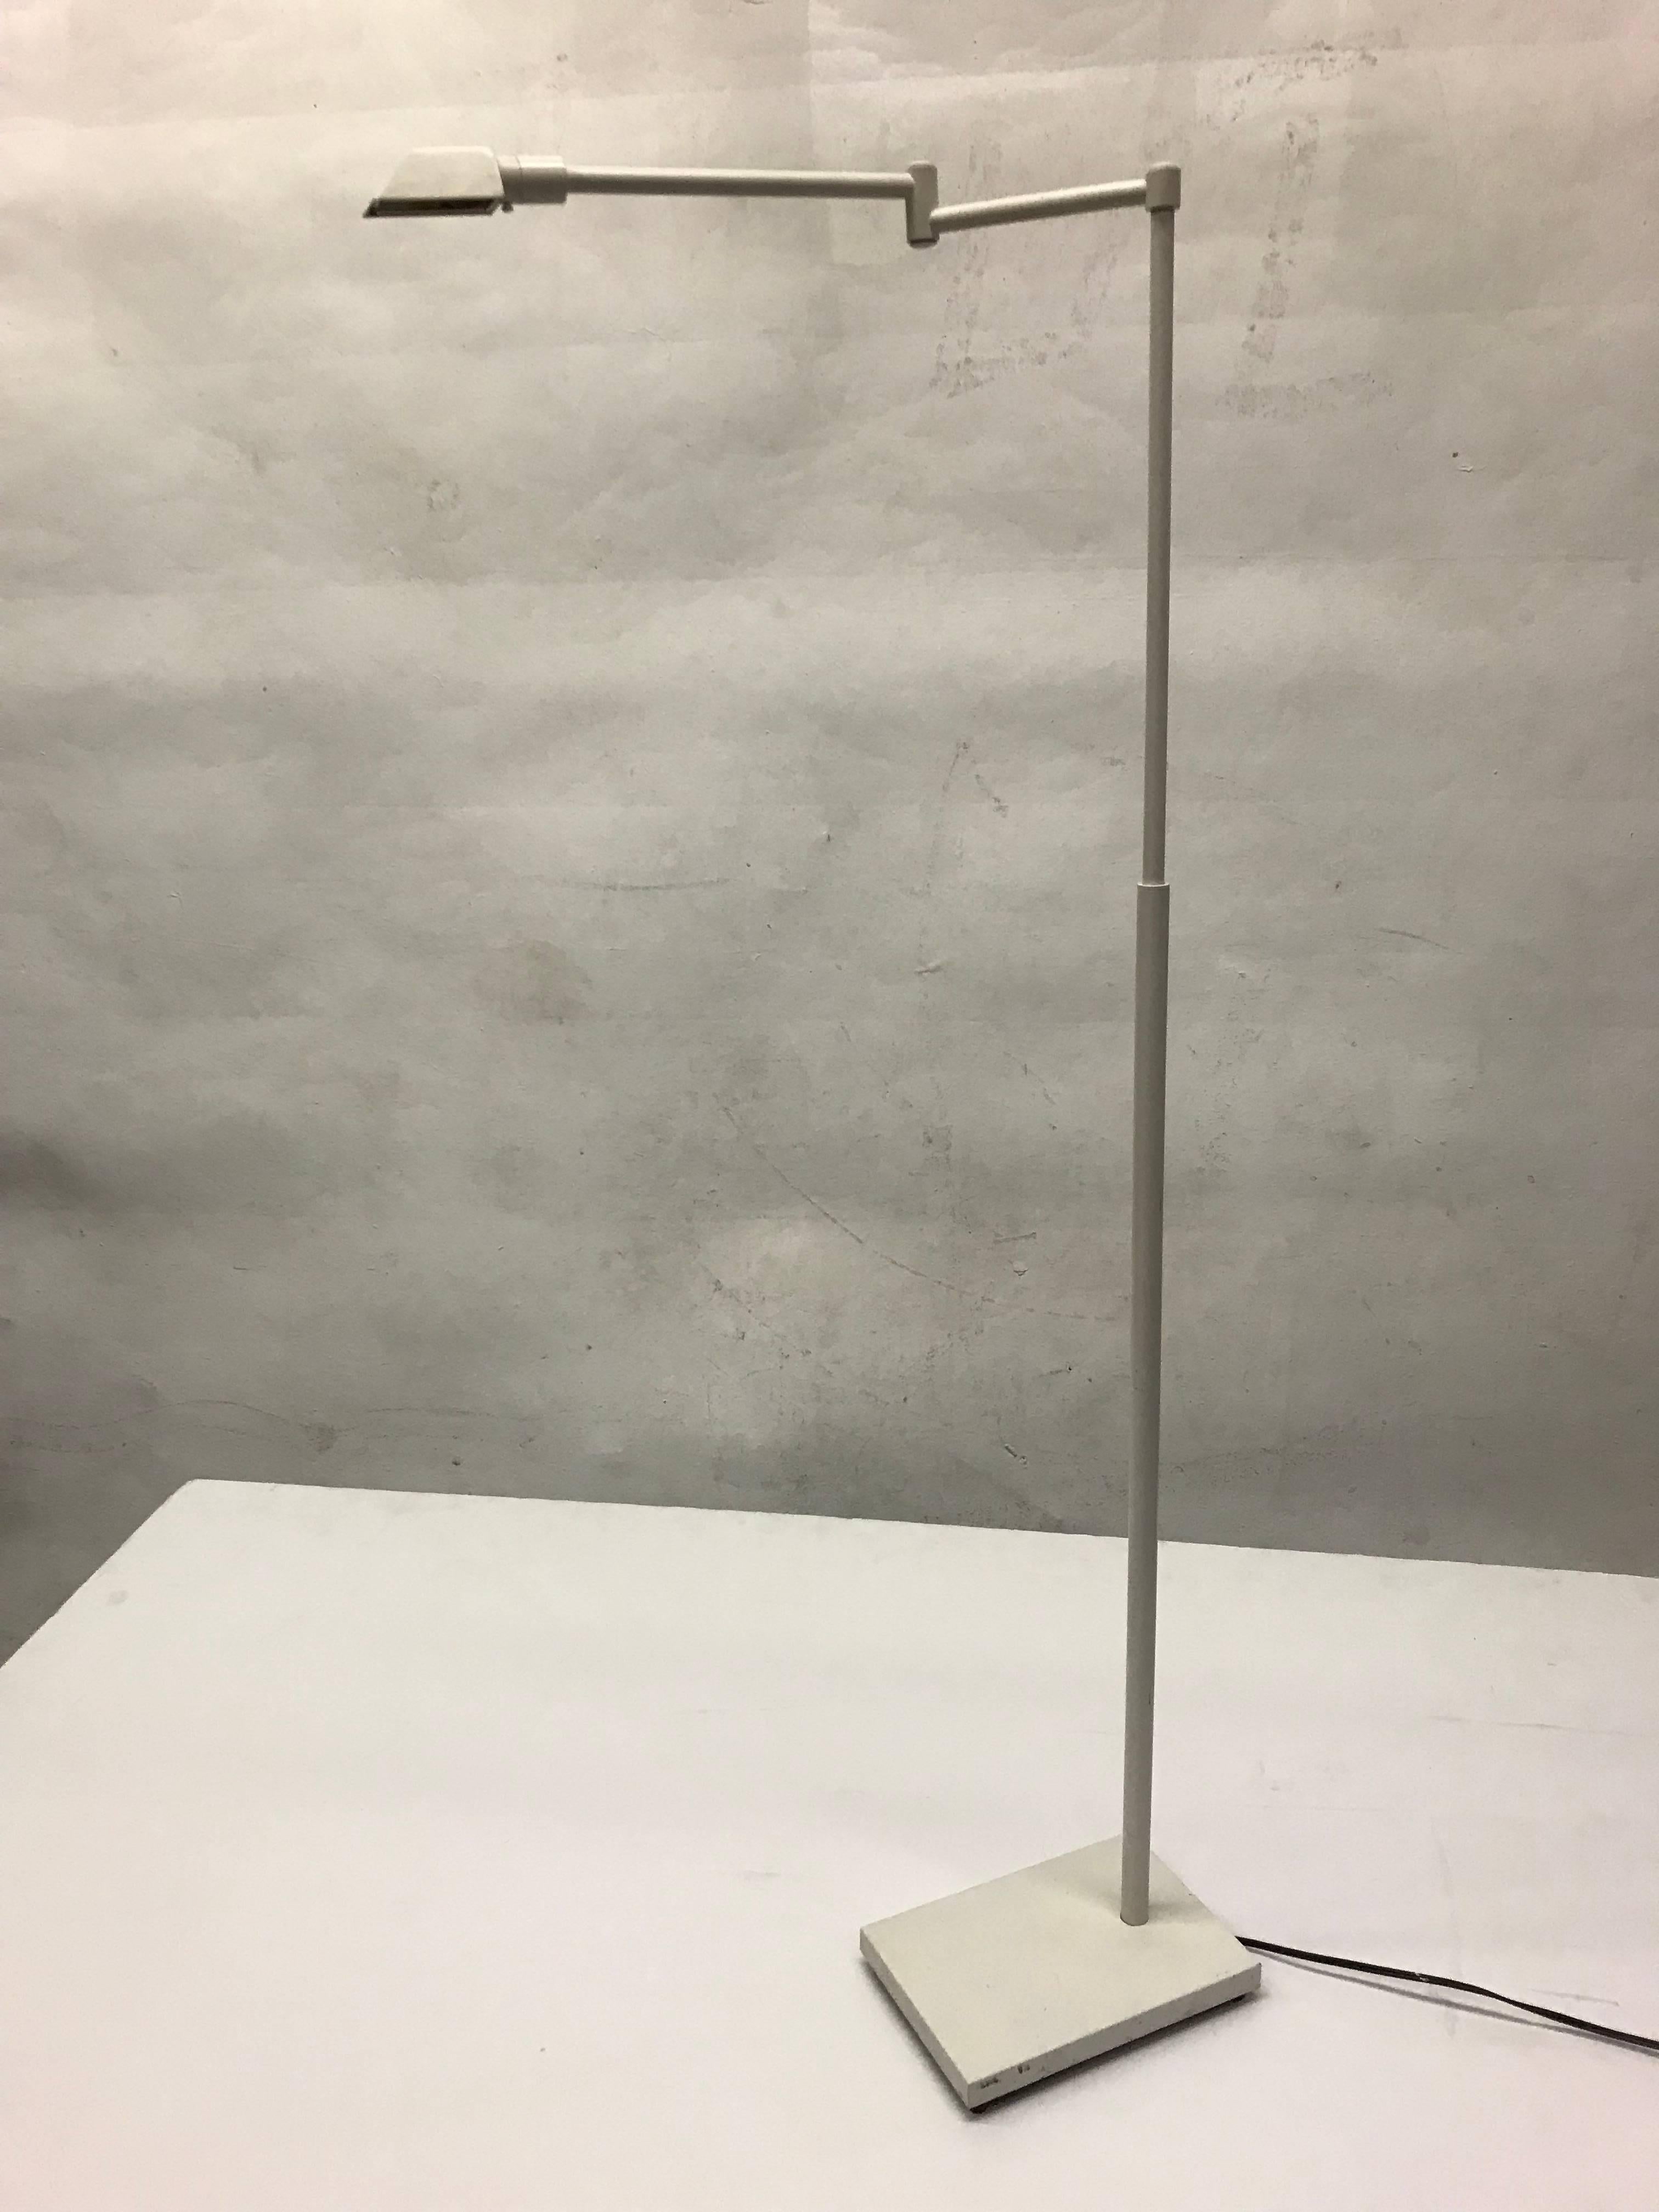 Floor lamp in white lacquered metal. Very narrow with small shade - shade itself measures 1 5/8